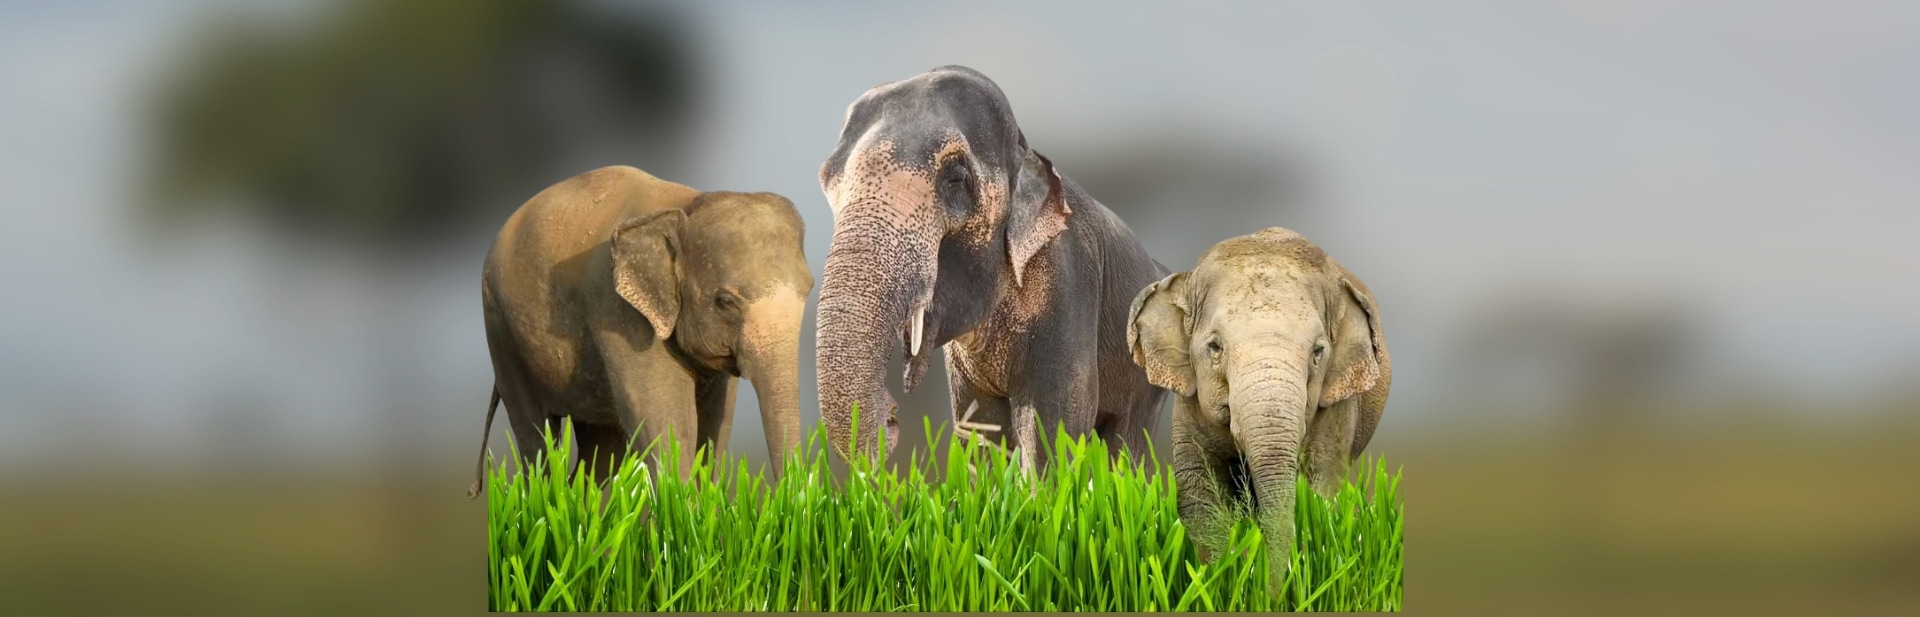 The Uplifting Story of These Three Elephants Will Show You the Power of Resilience and Recovery